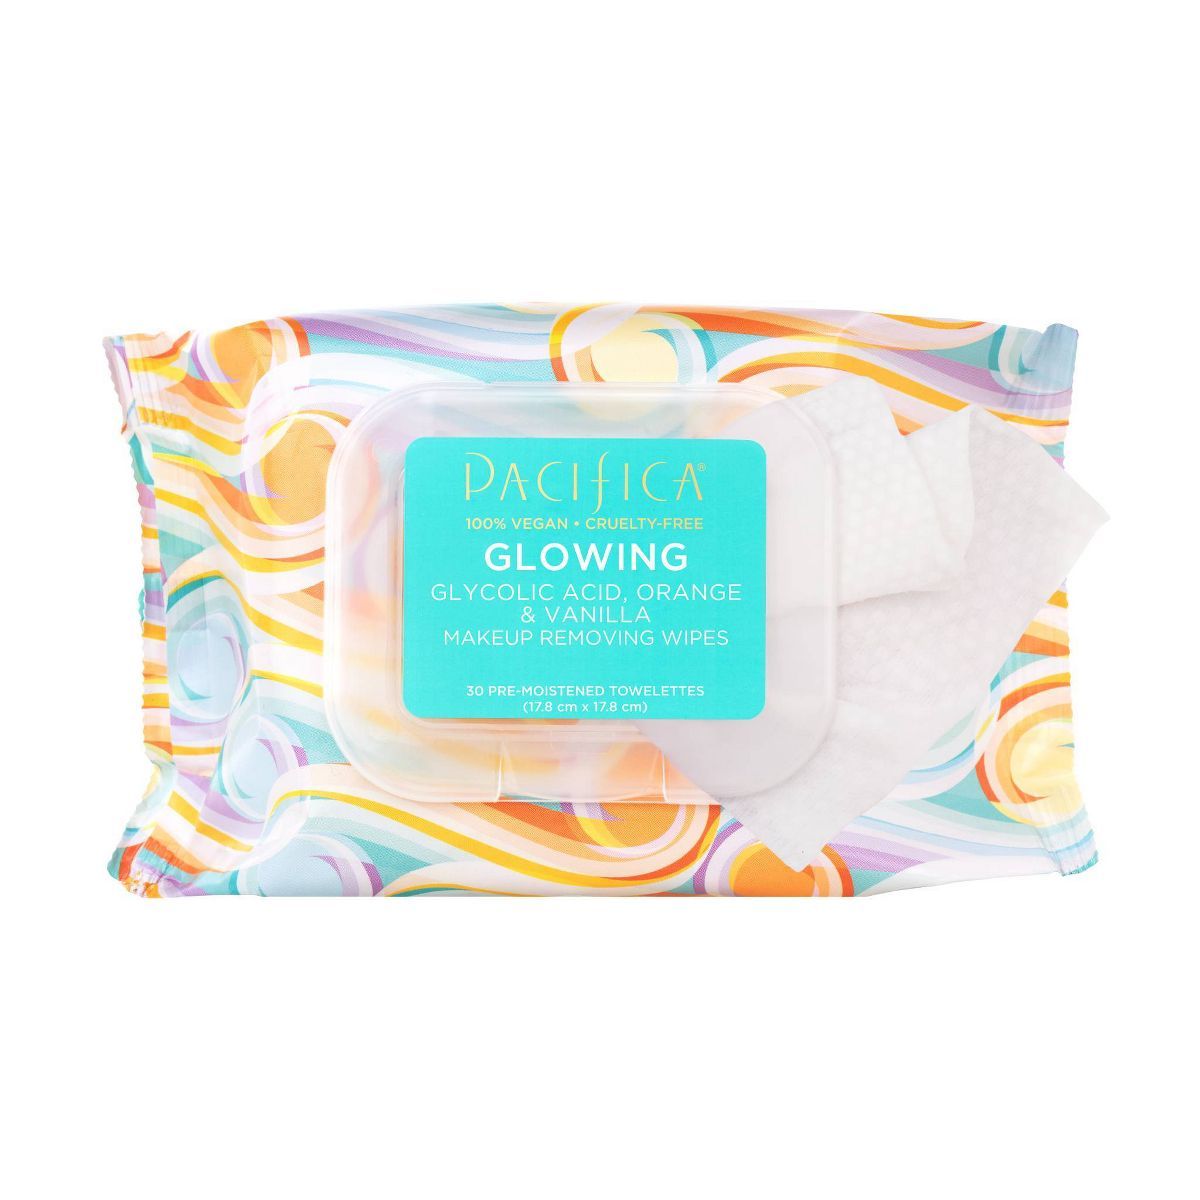 Pacifica Glowing Makeup Removing Wipes - Orange - 30ct | Target